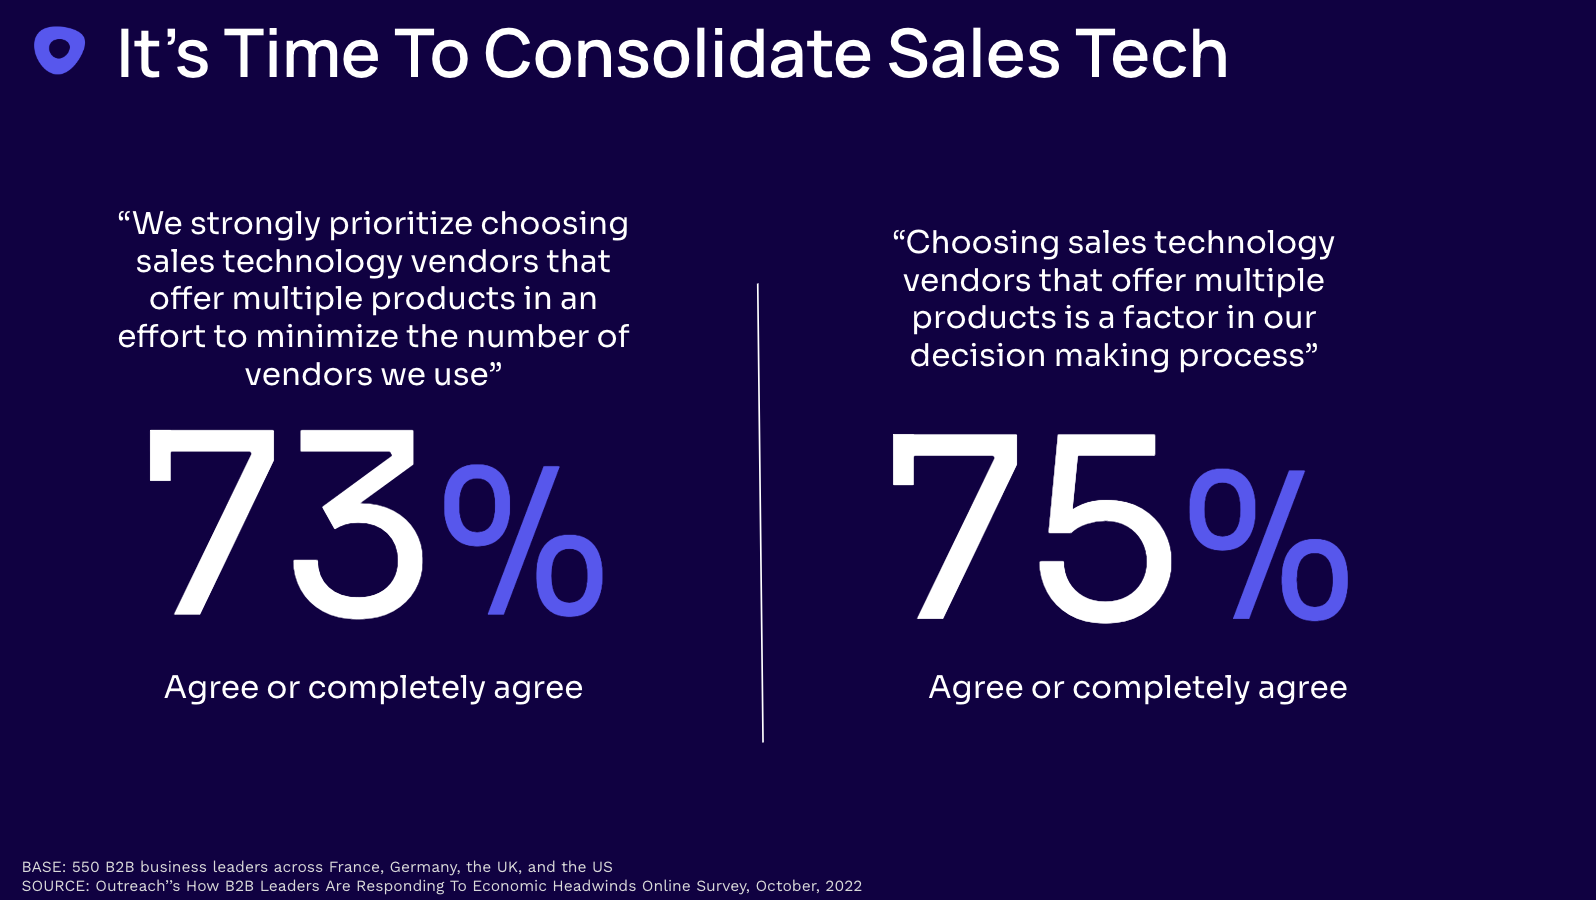 Tech consolidation stat